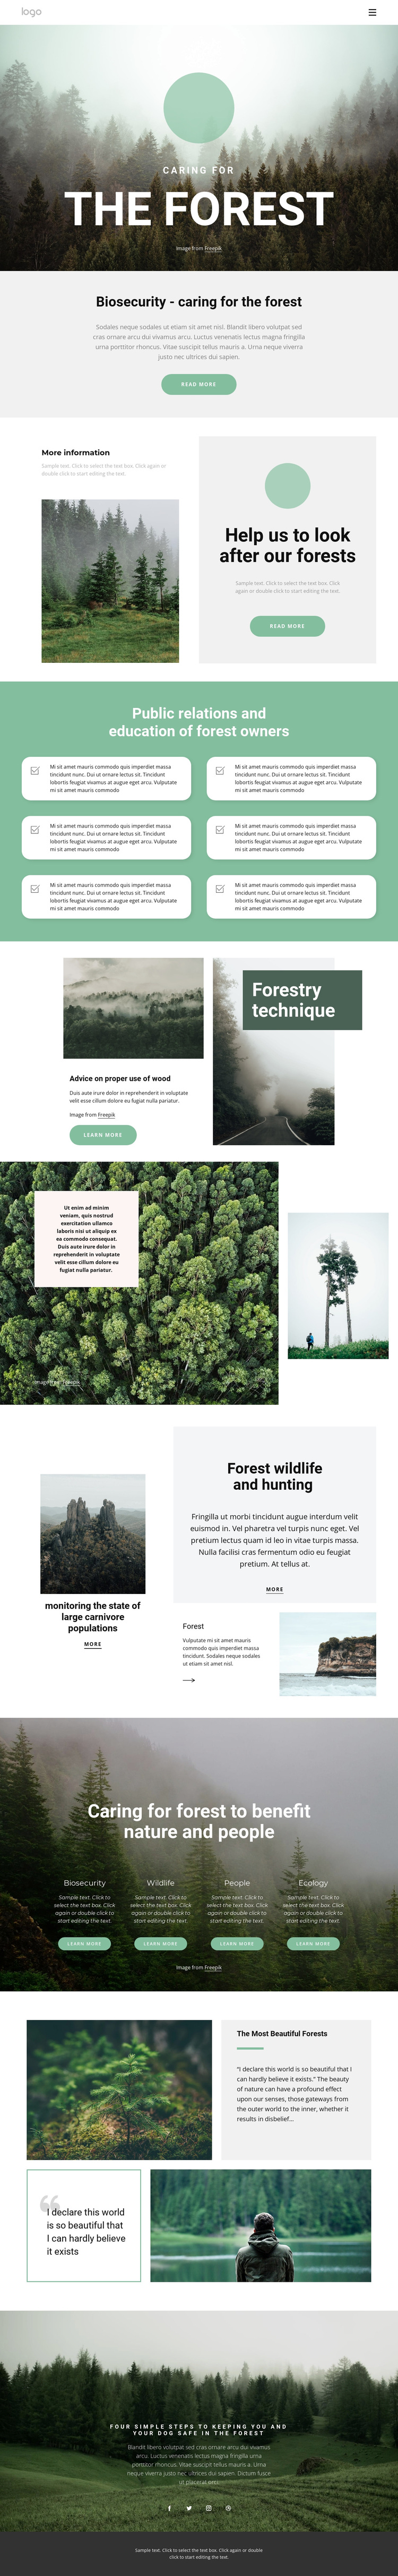 Caring for parks and forests Joomla Page Builder